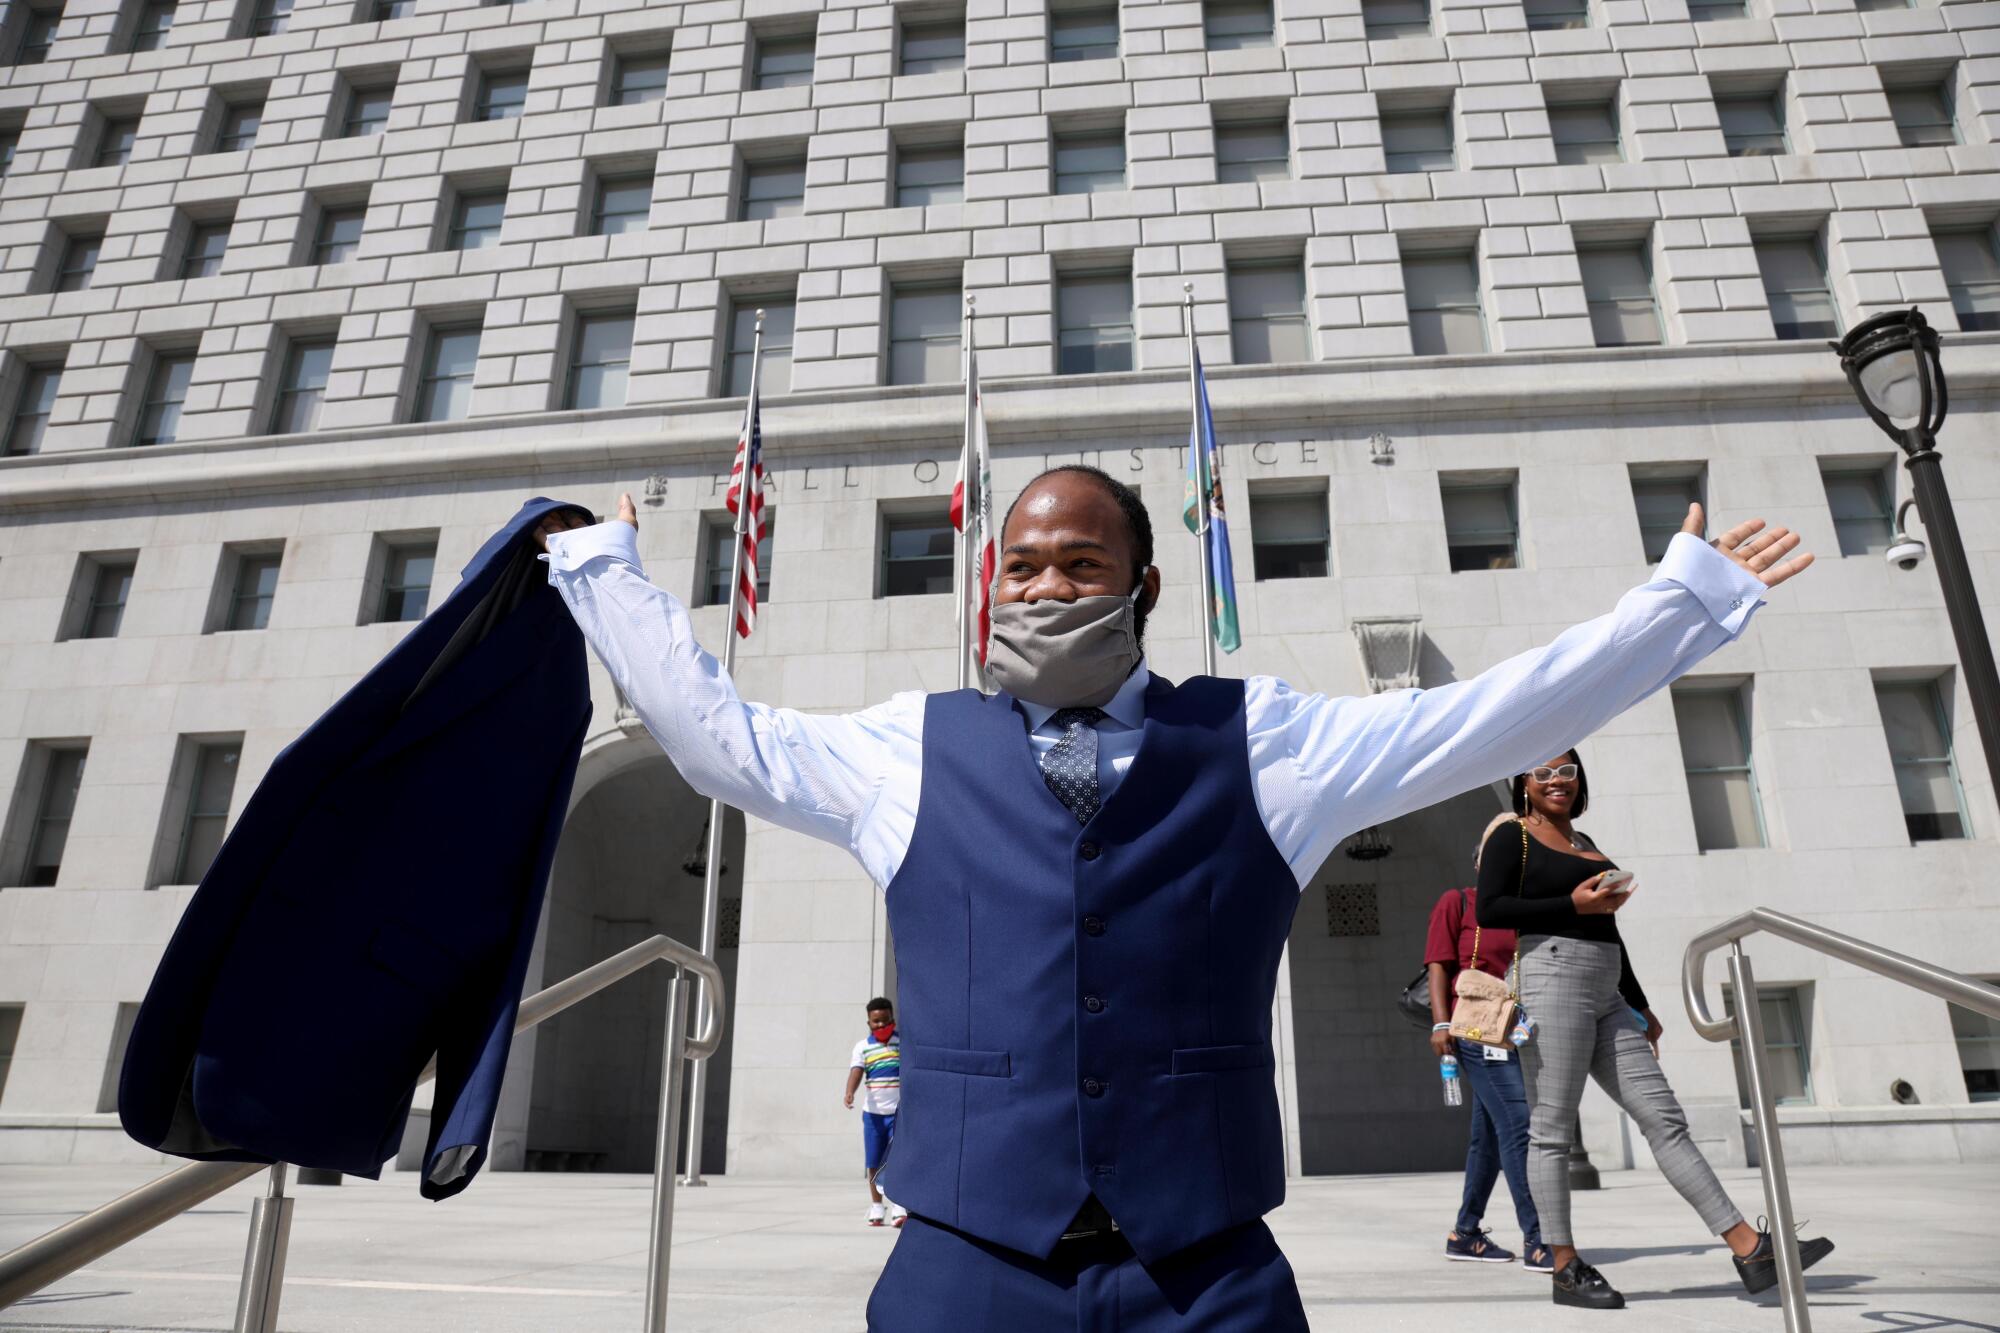 Derrick Harris raises his arms outside the Hall of Justice in Los Angeles.